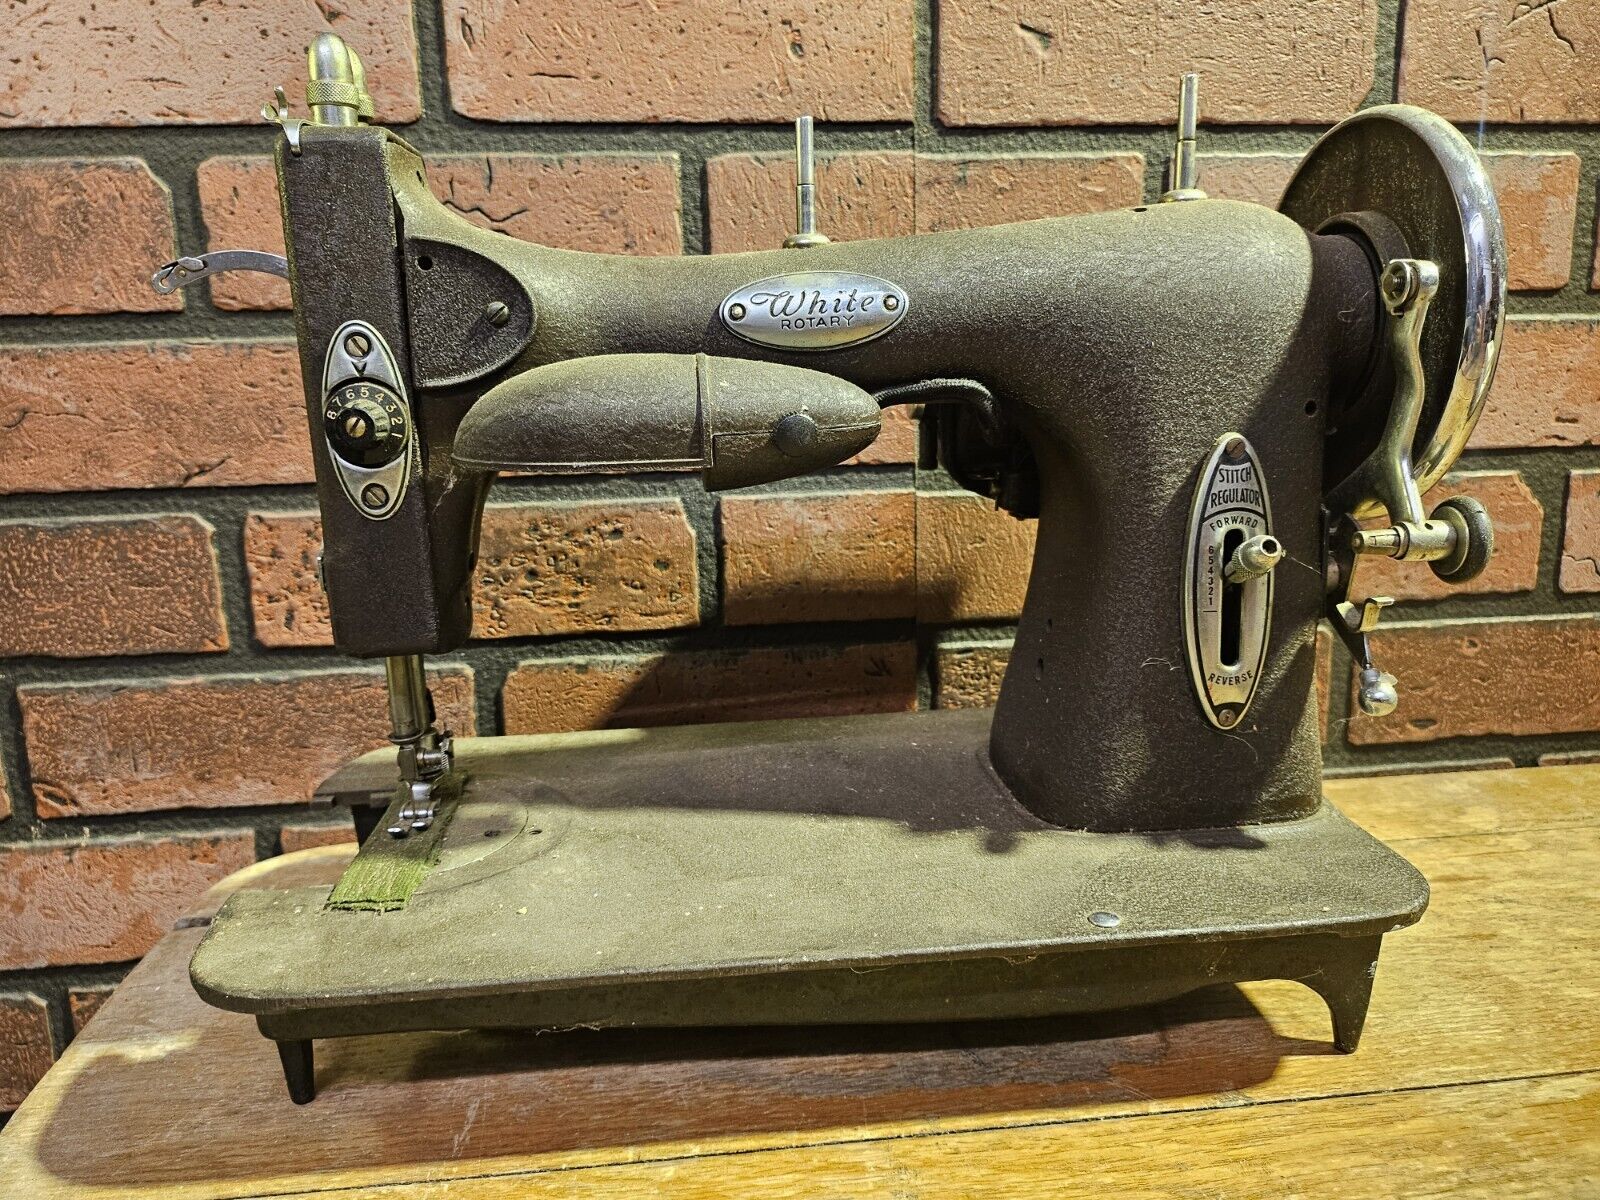 White Rotary Vintage Sewing Machine 65 Watts Doesn\'t Work For Parts